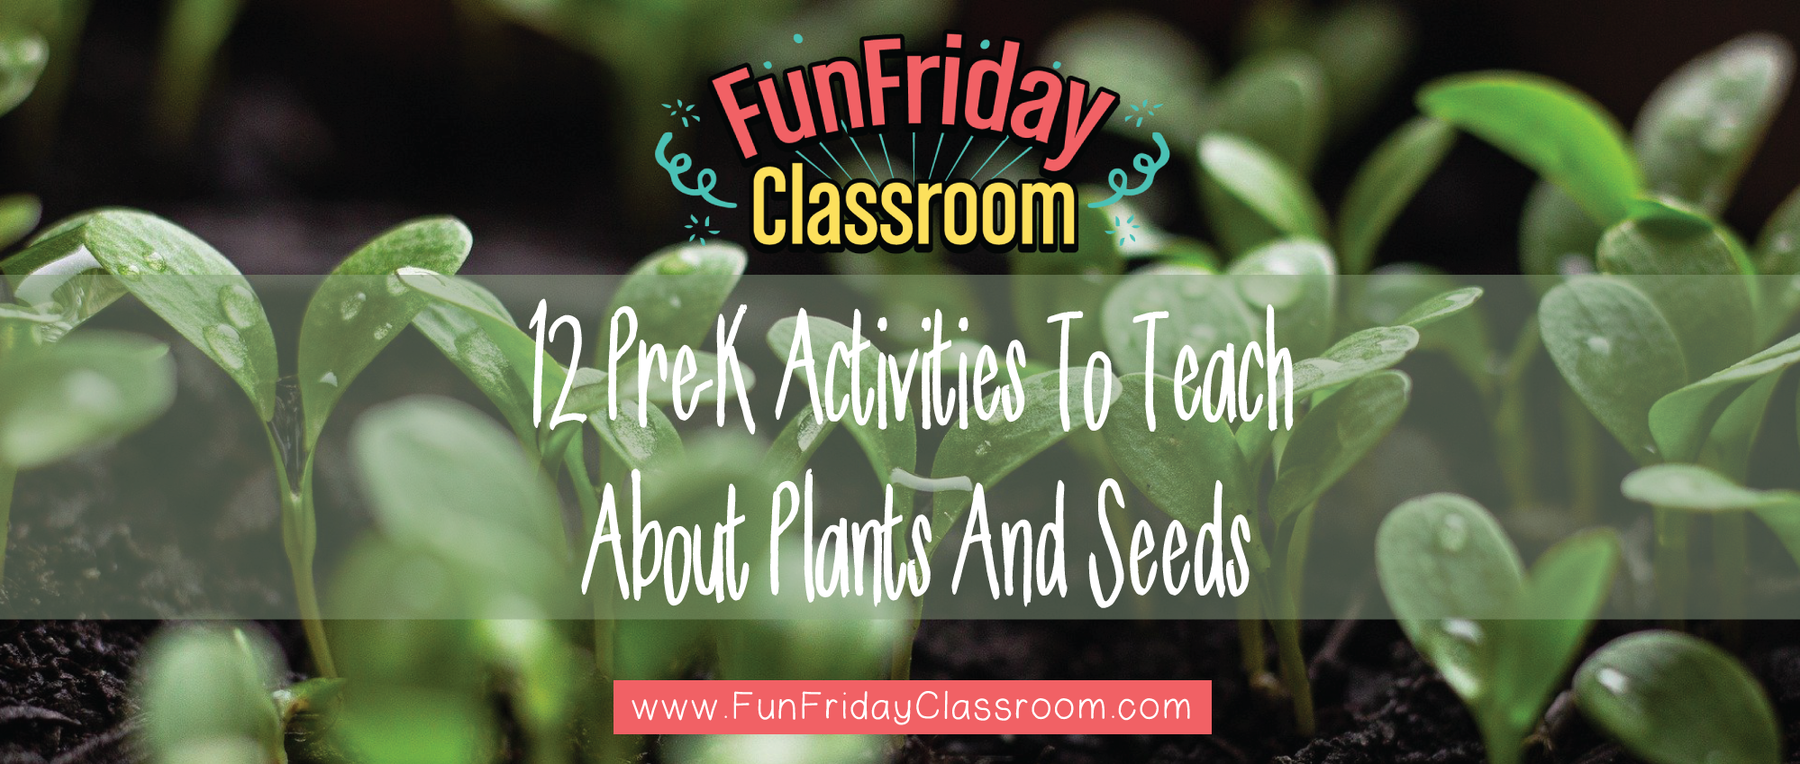 12 Pre-K Activities To Teach About Plants And Seeds